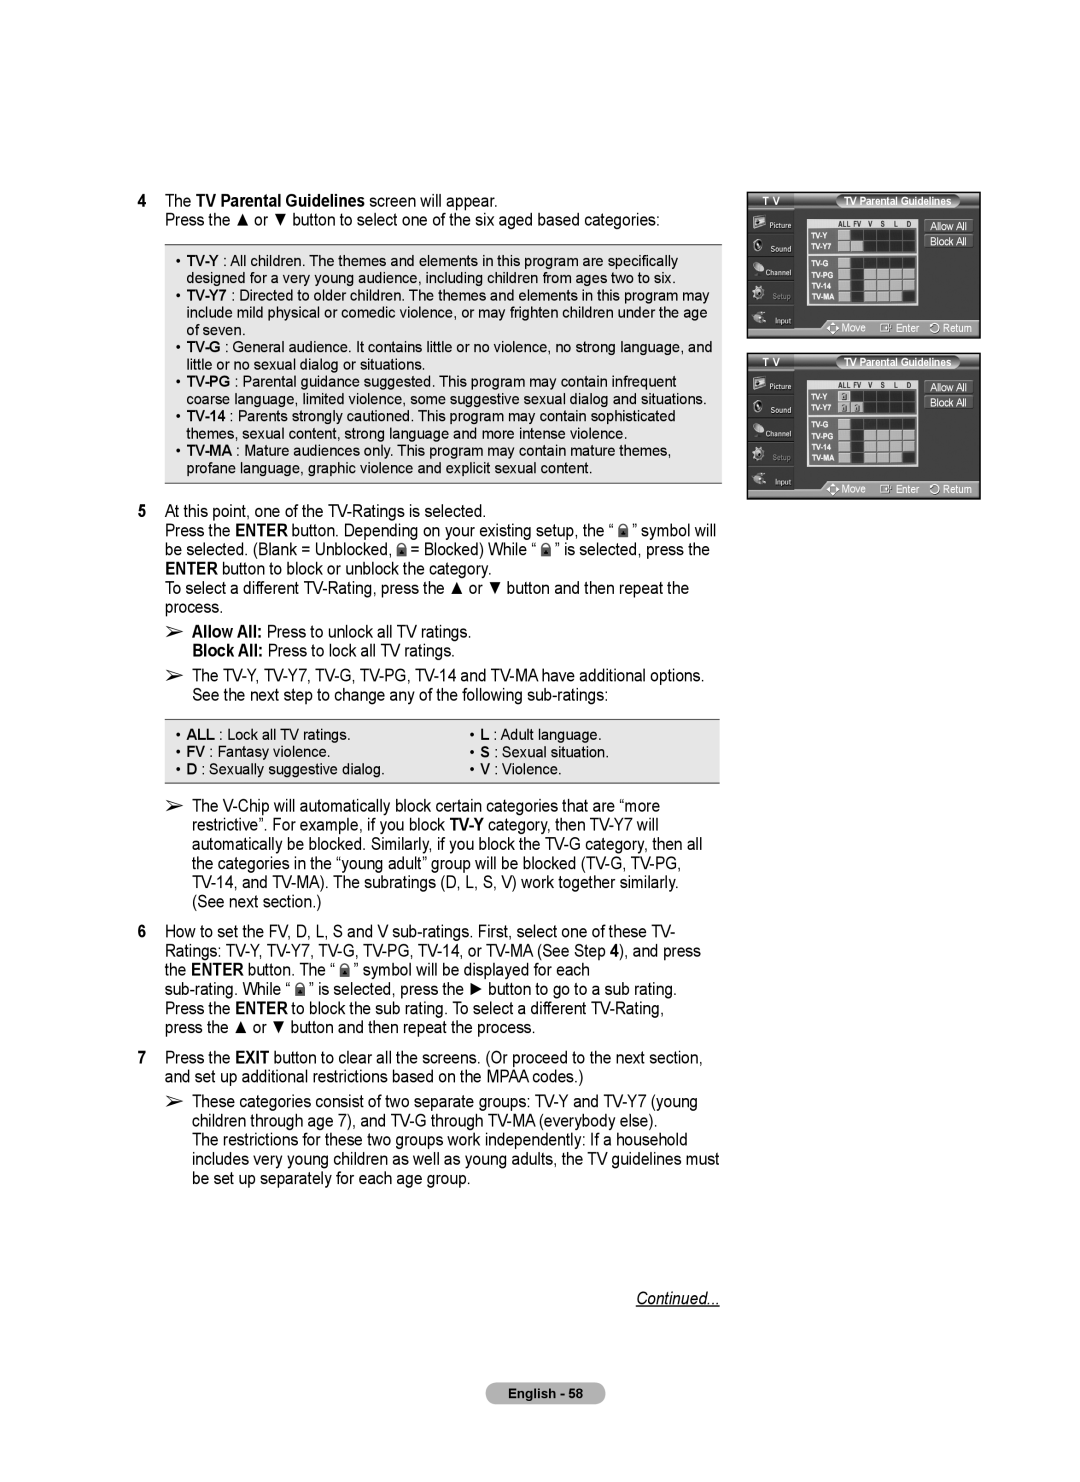 Samsung 460 user manual The TV Parental Guidelines screen will appear, Continued 